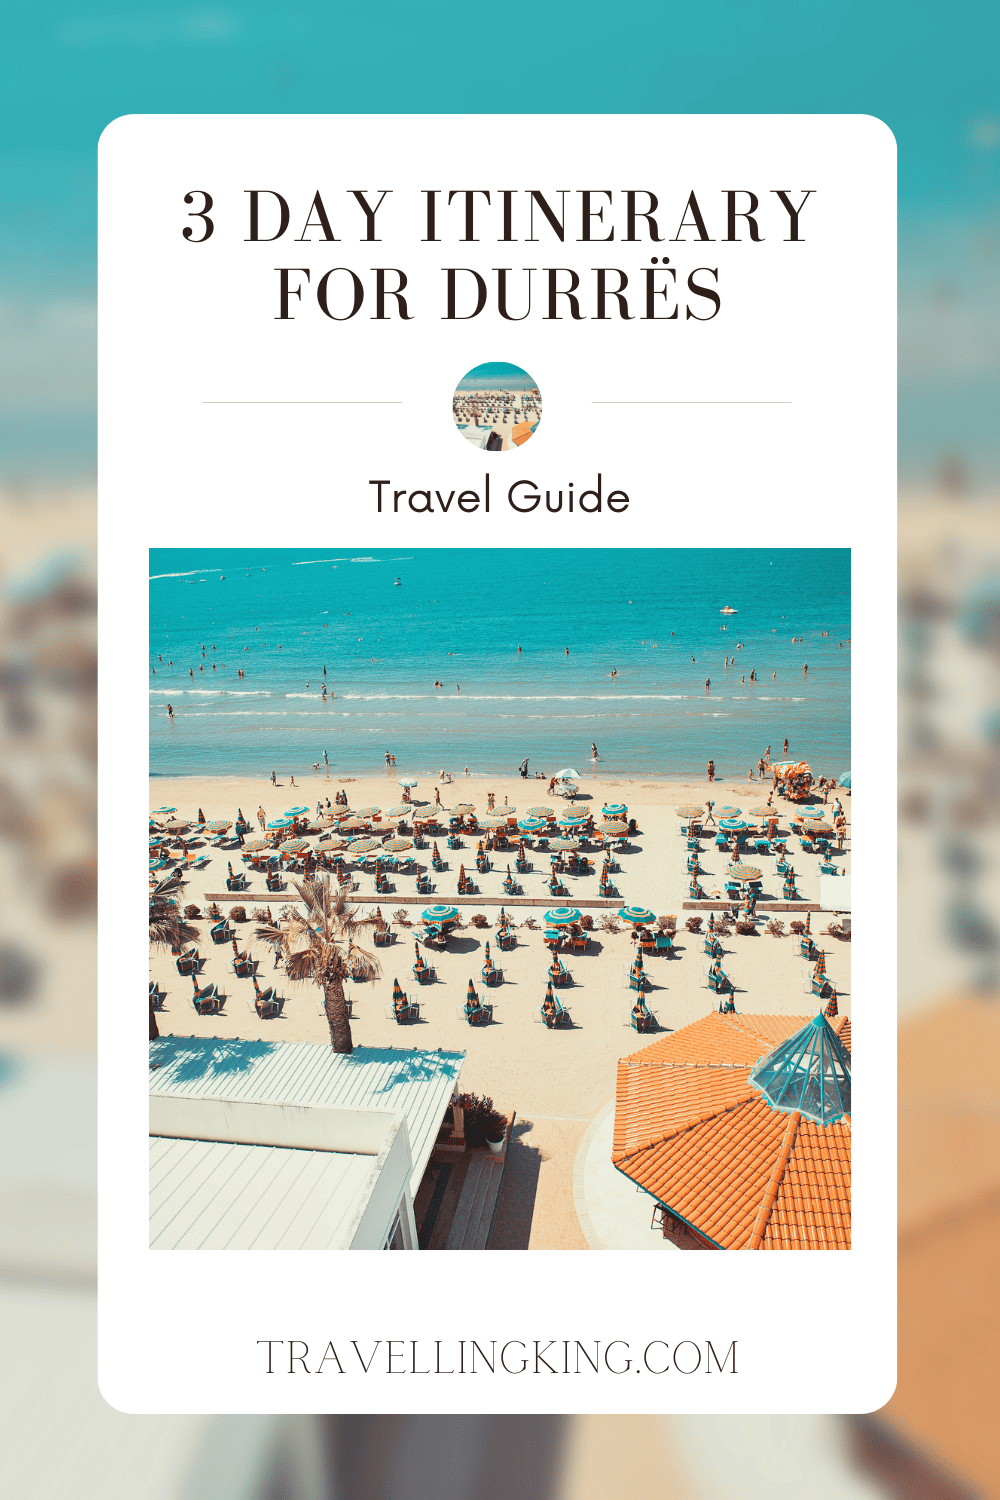 3 Day Itinerary for Durrës